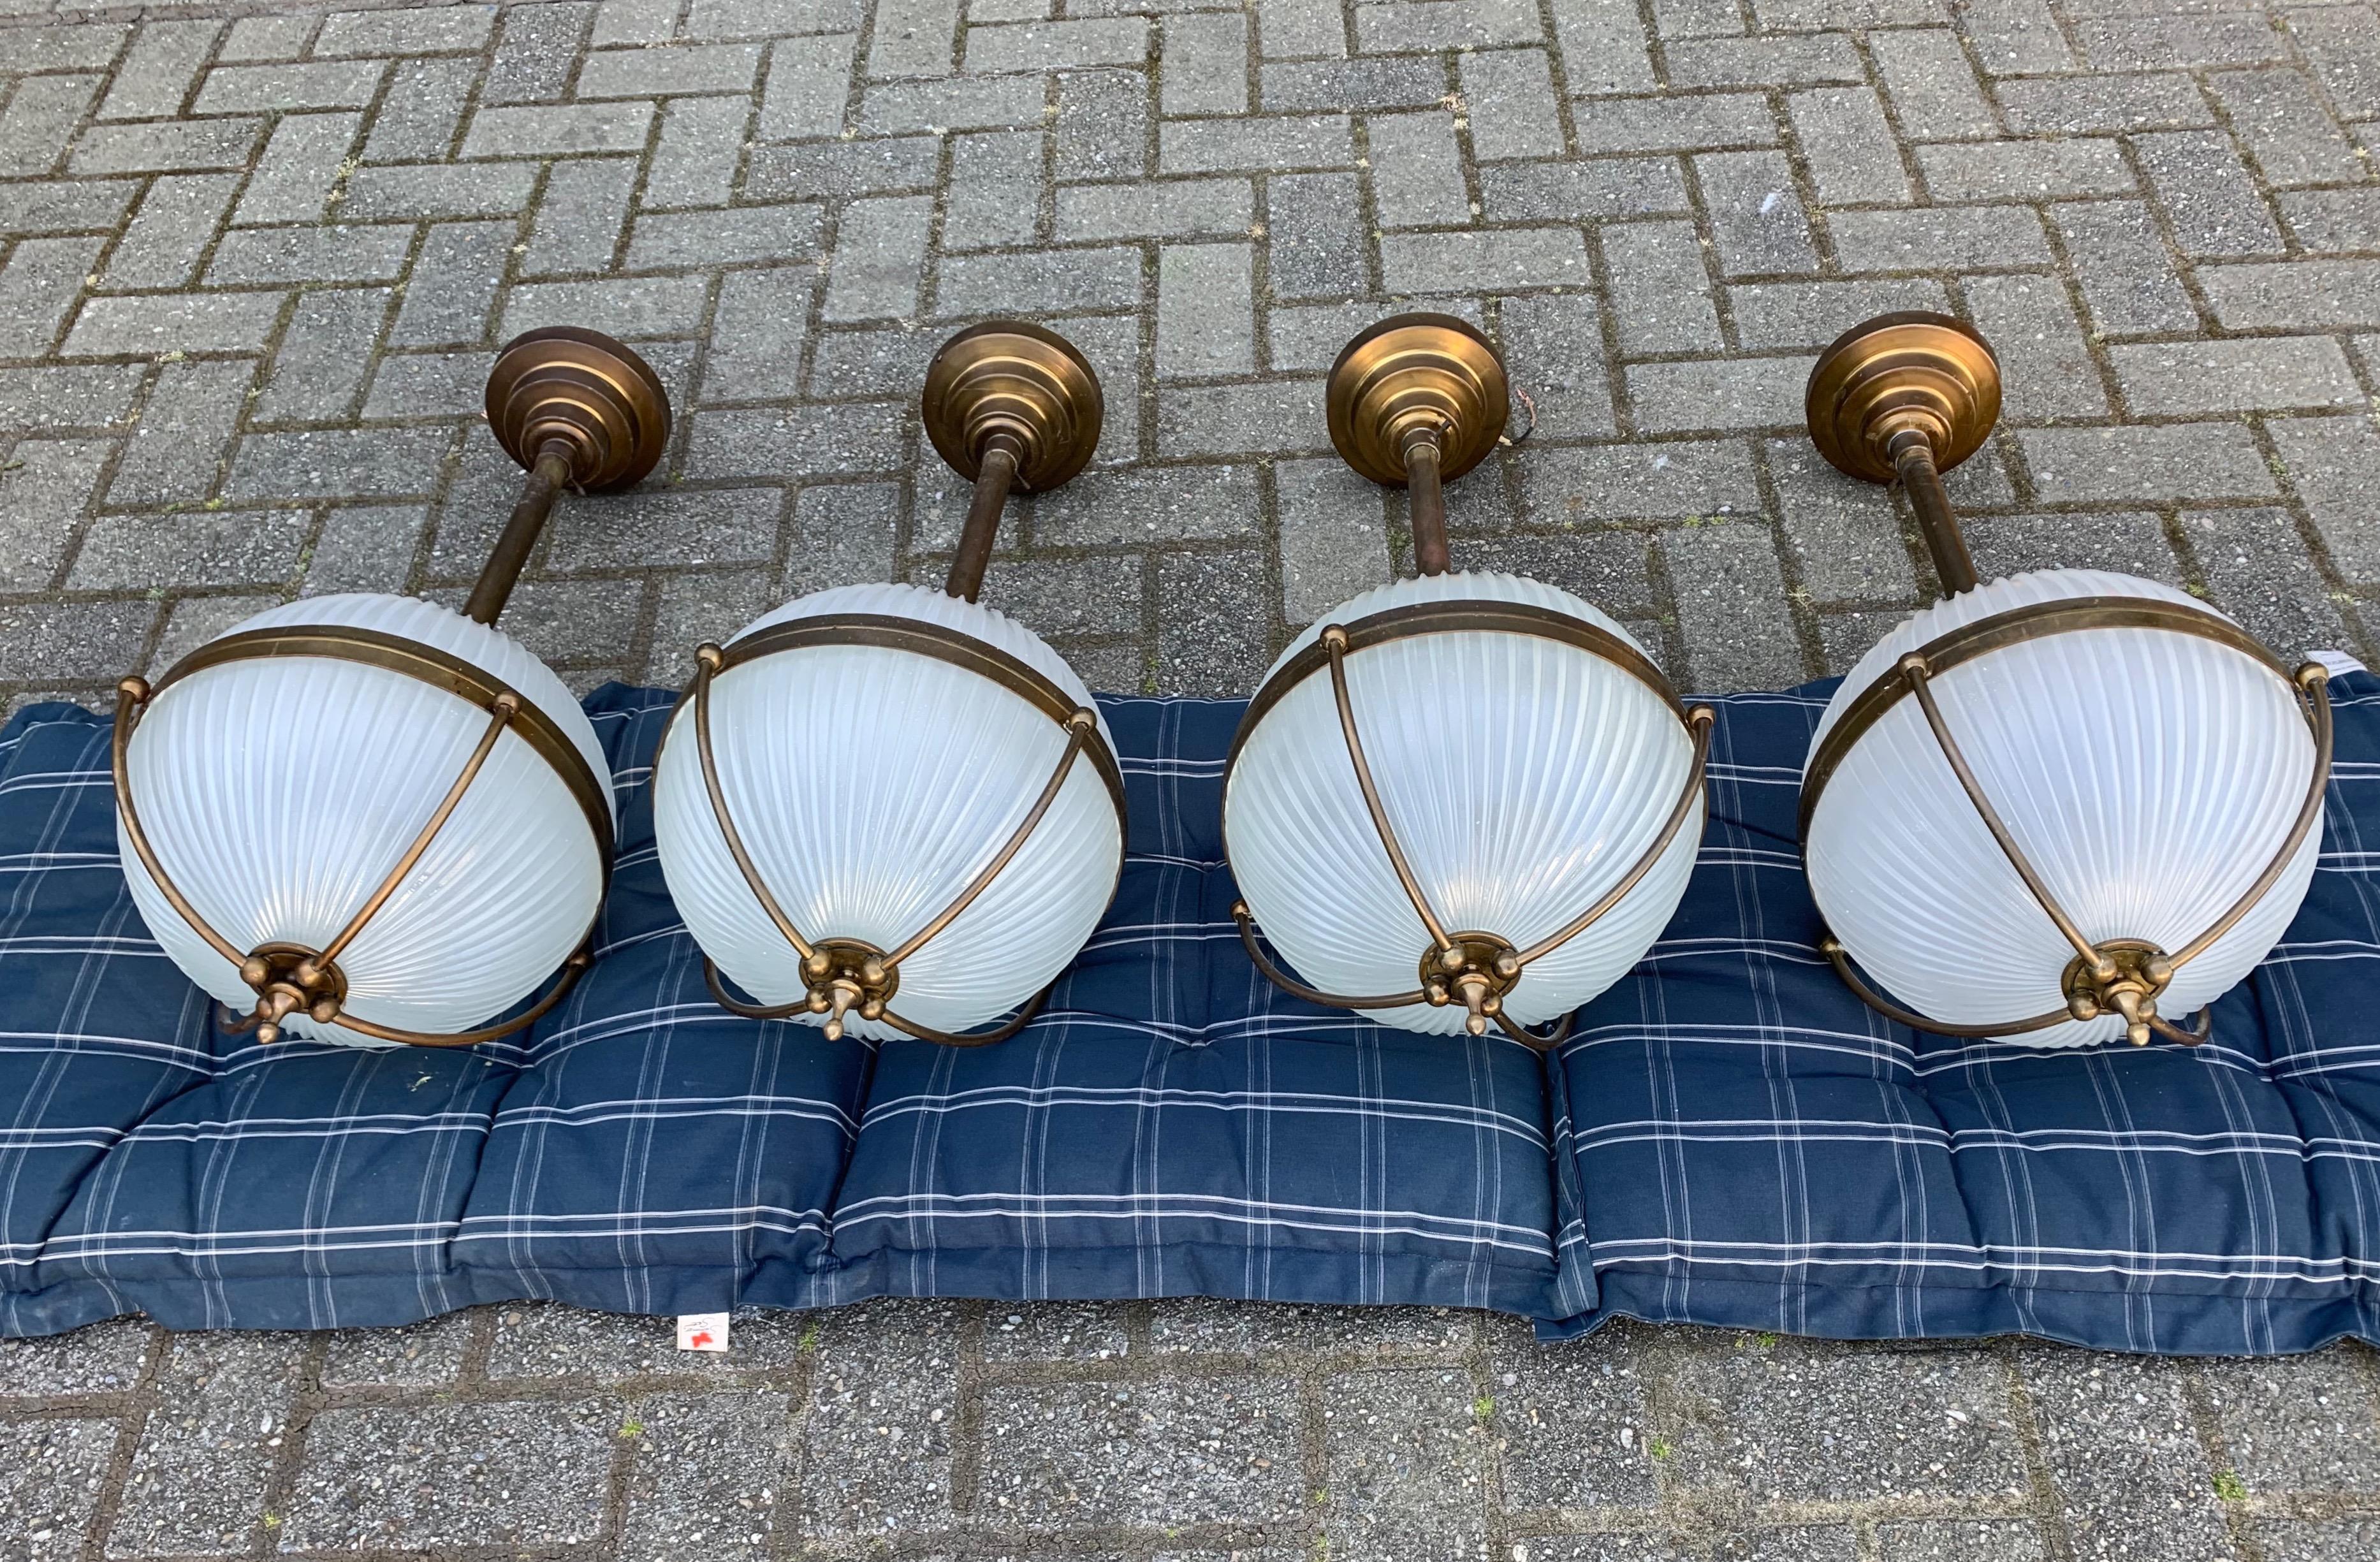 Good size and great shape group of four identical pendants.

If you are looking for a group of beautiful and truly stylish pendants for a midcentury or for an Art Deco interior then this set of four could be your perfect lighting solution. This